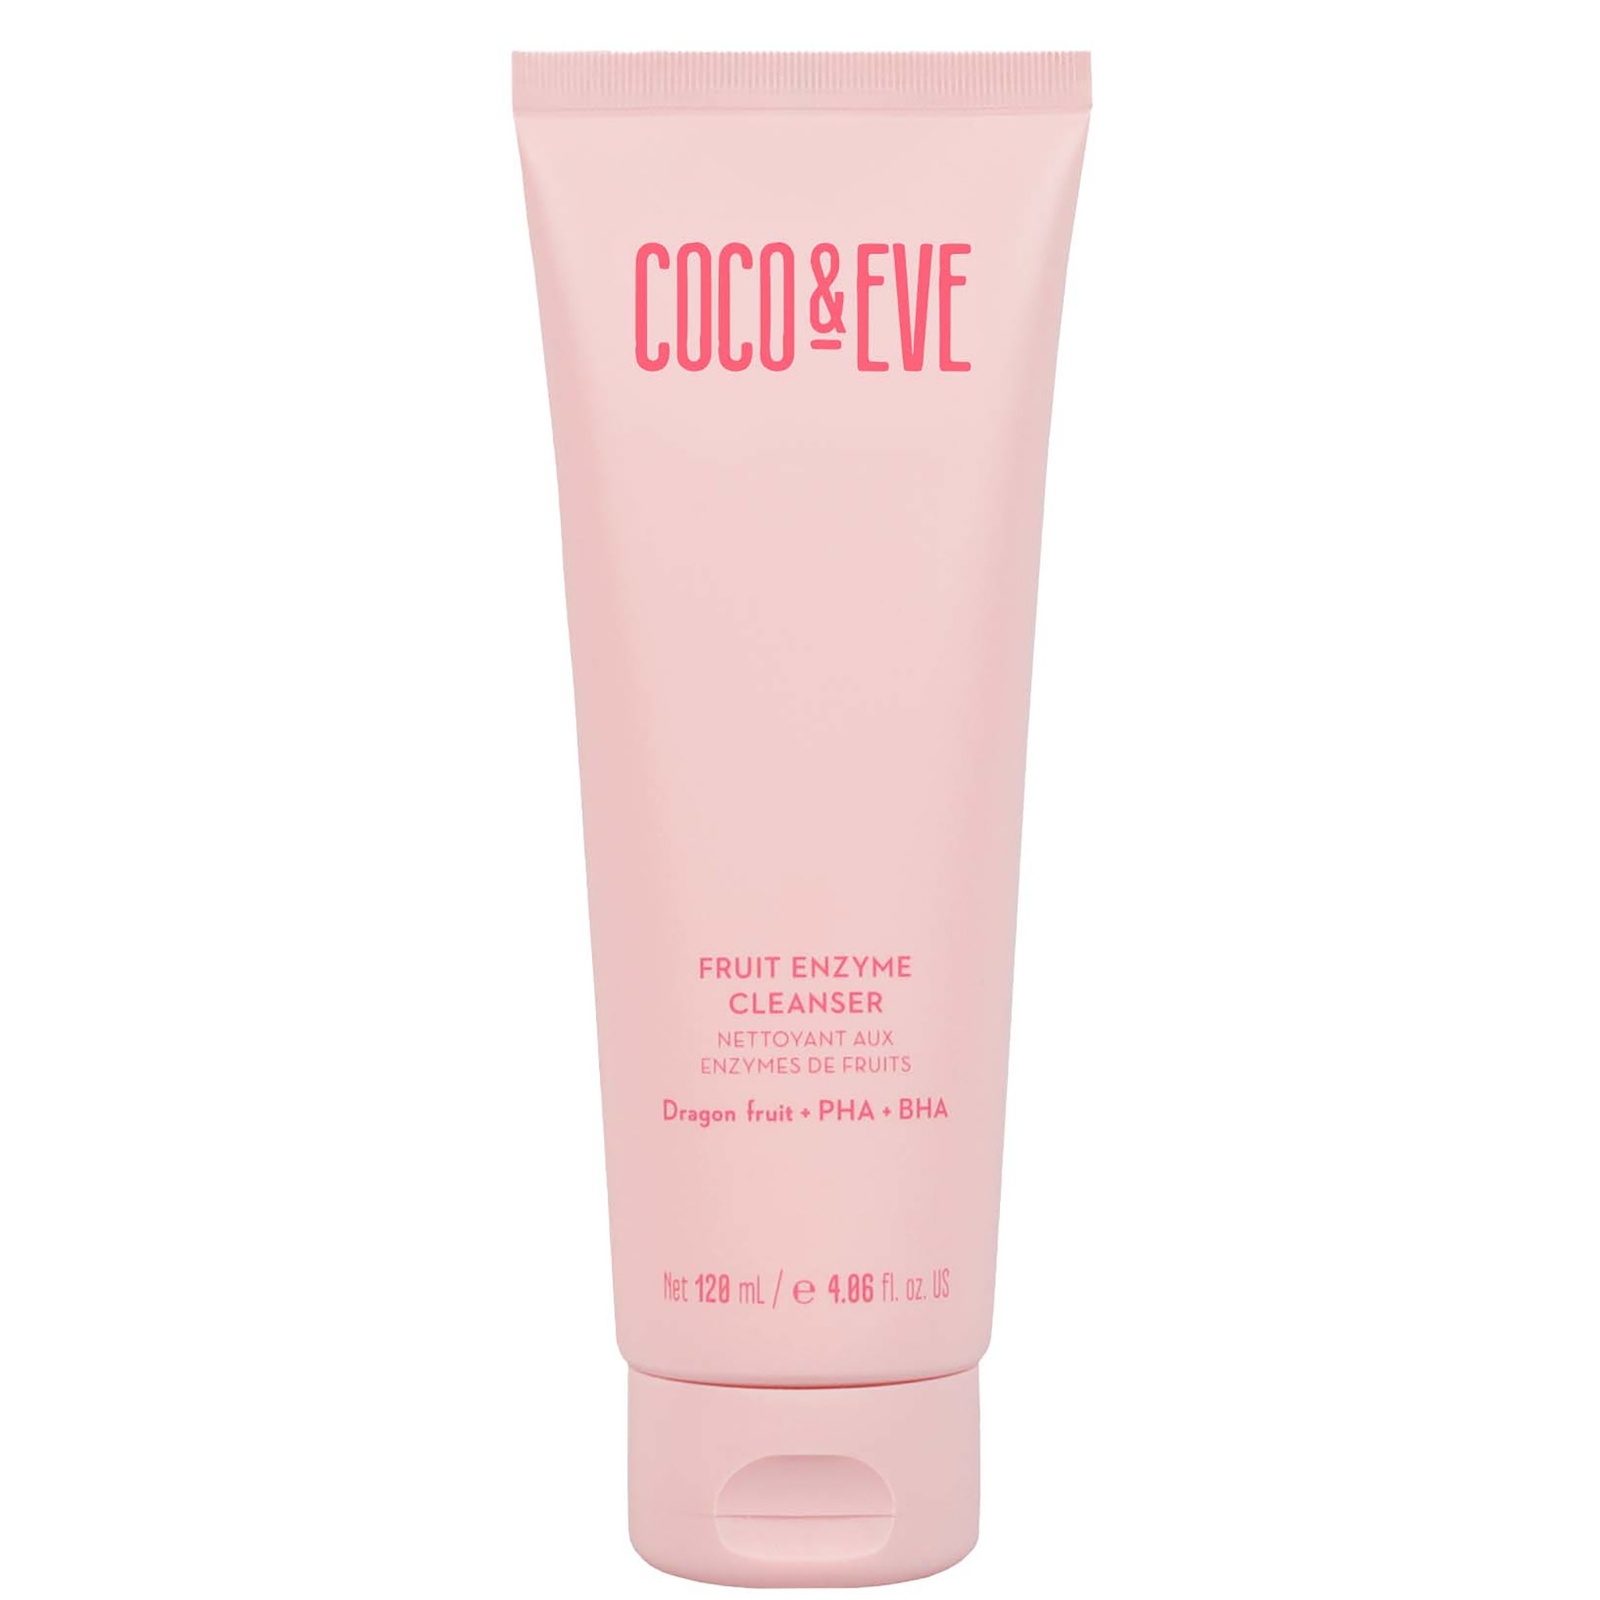 Coco & Eve Fruit Enzyme Cleanser 120ml In Pink